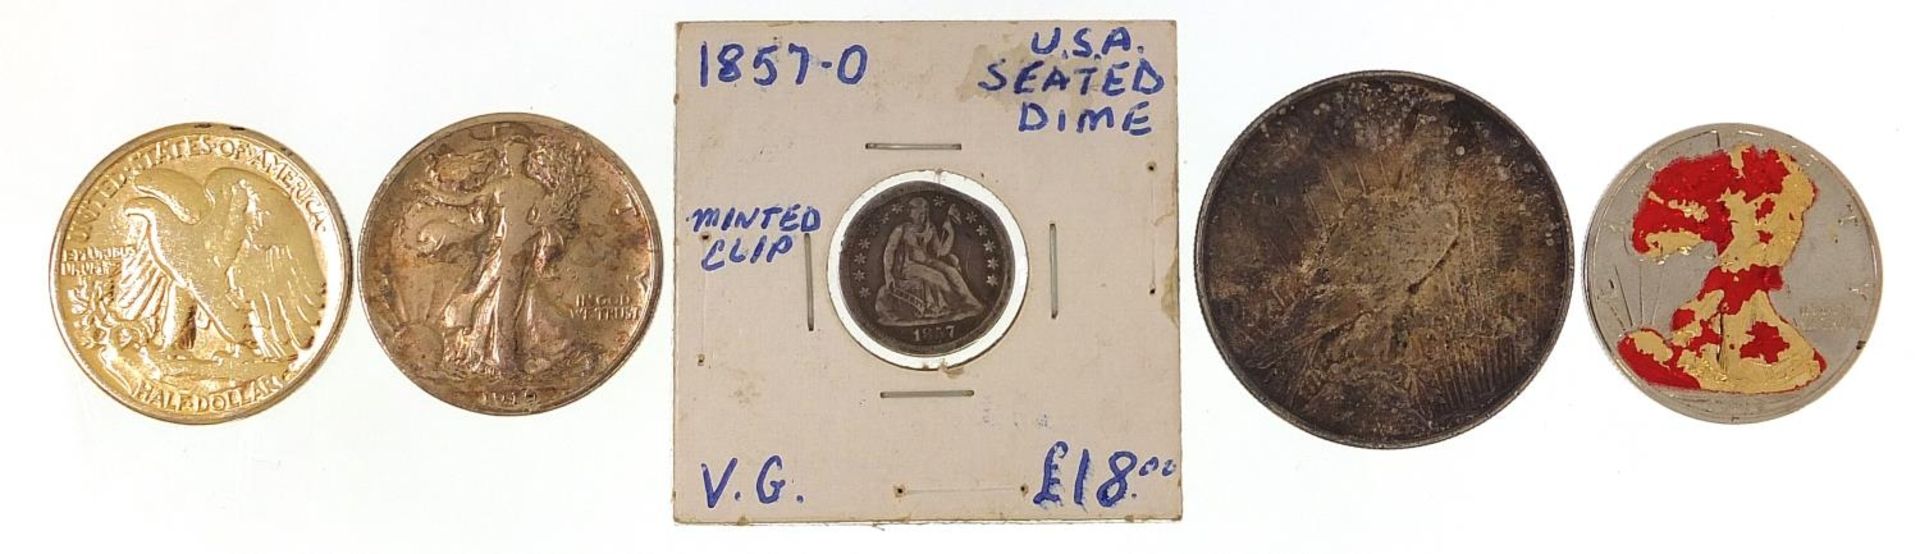 19th century and later American coinage including 1857 one dime, 1922 dollar and three half dollars, - Image 4 of 6